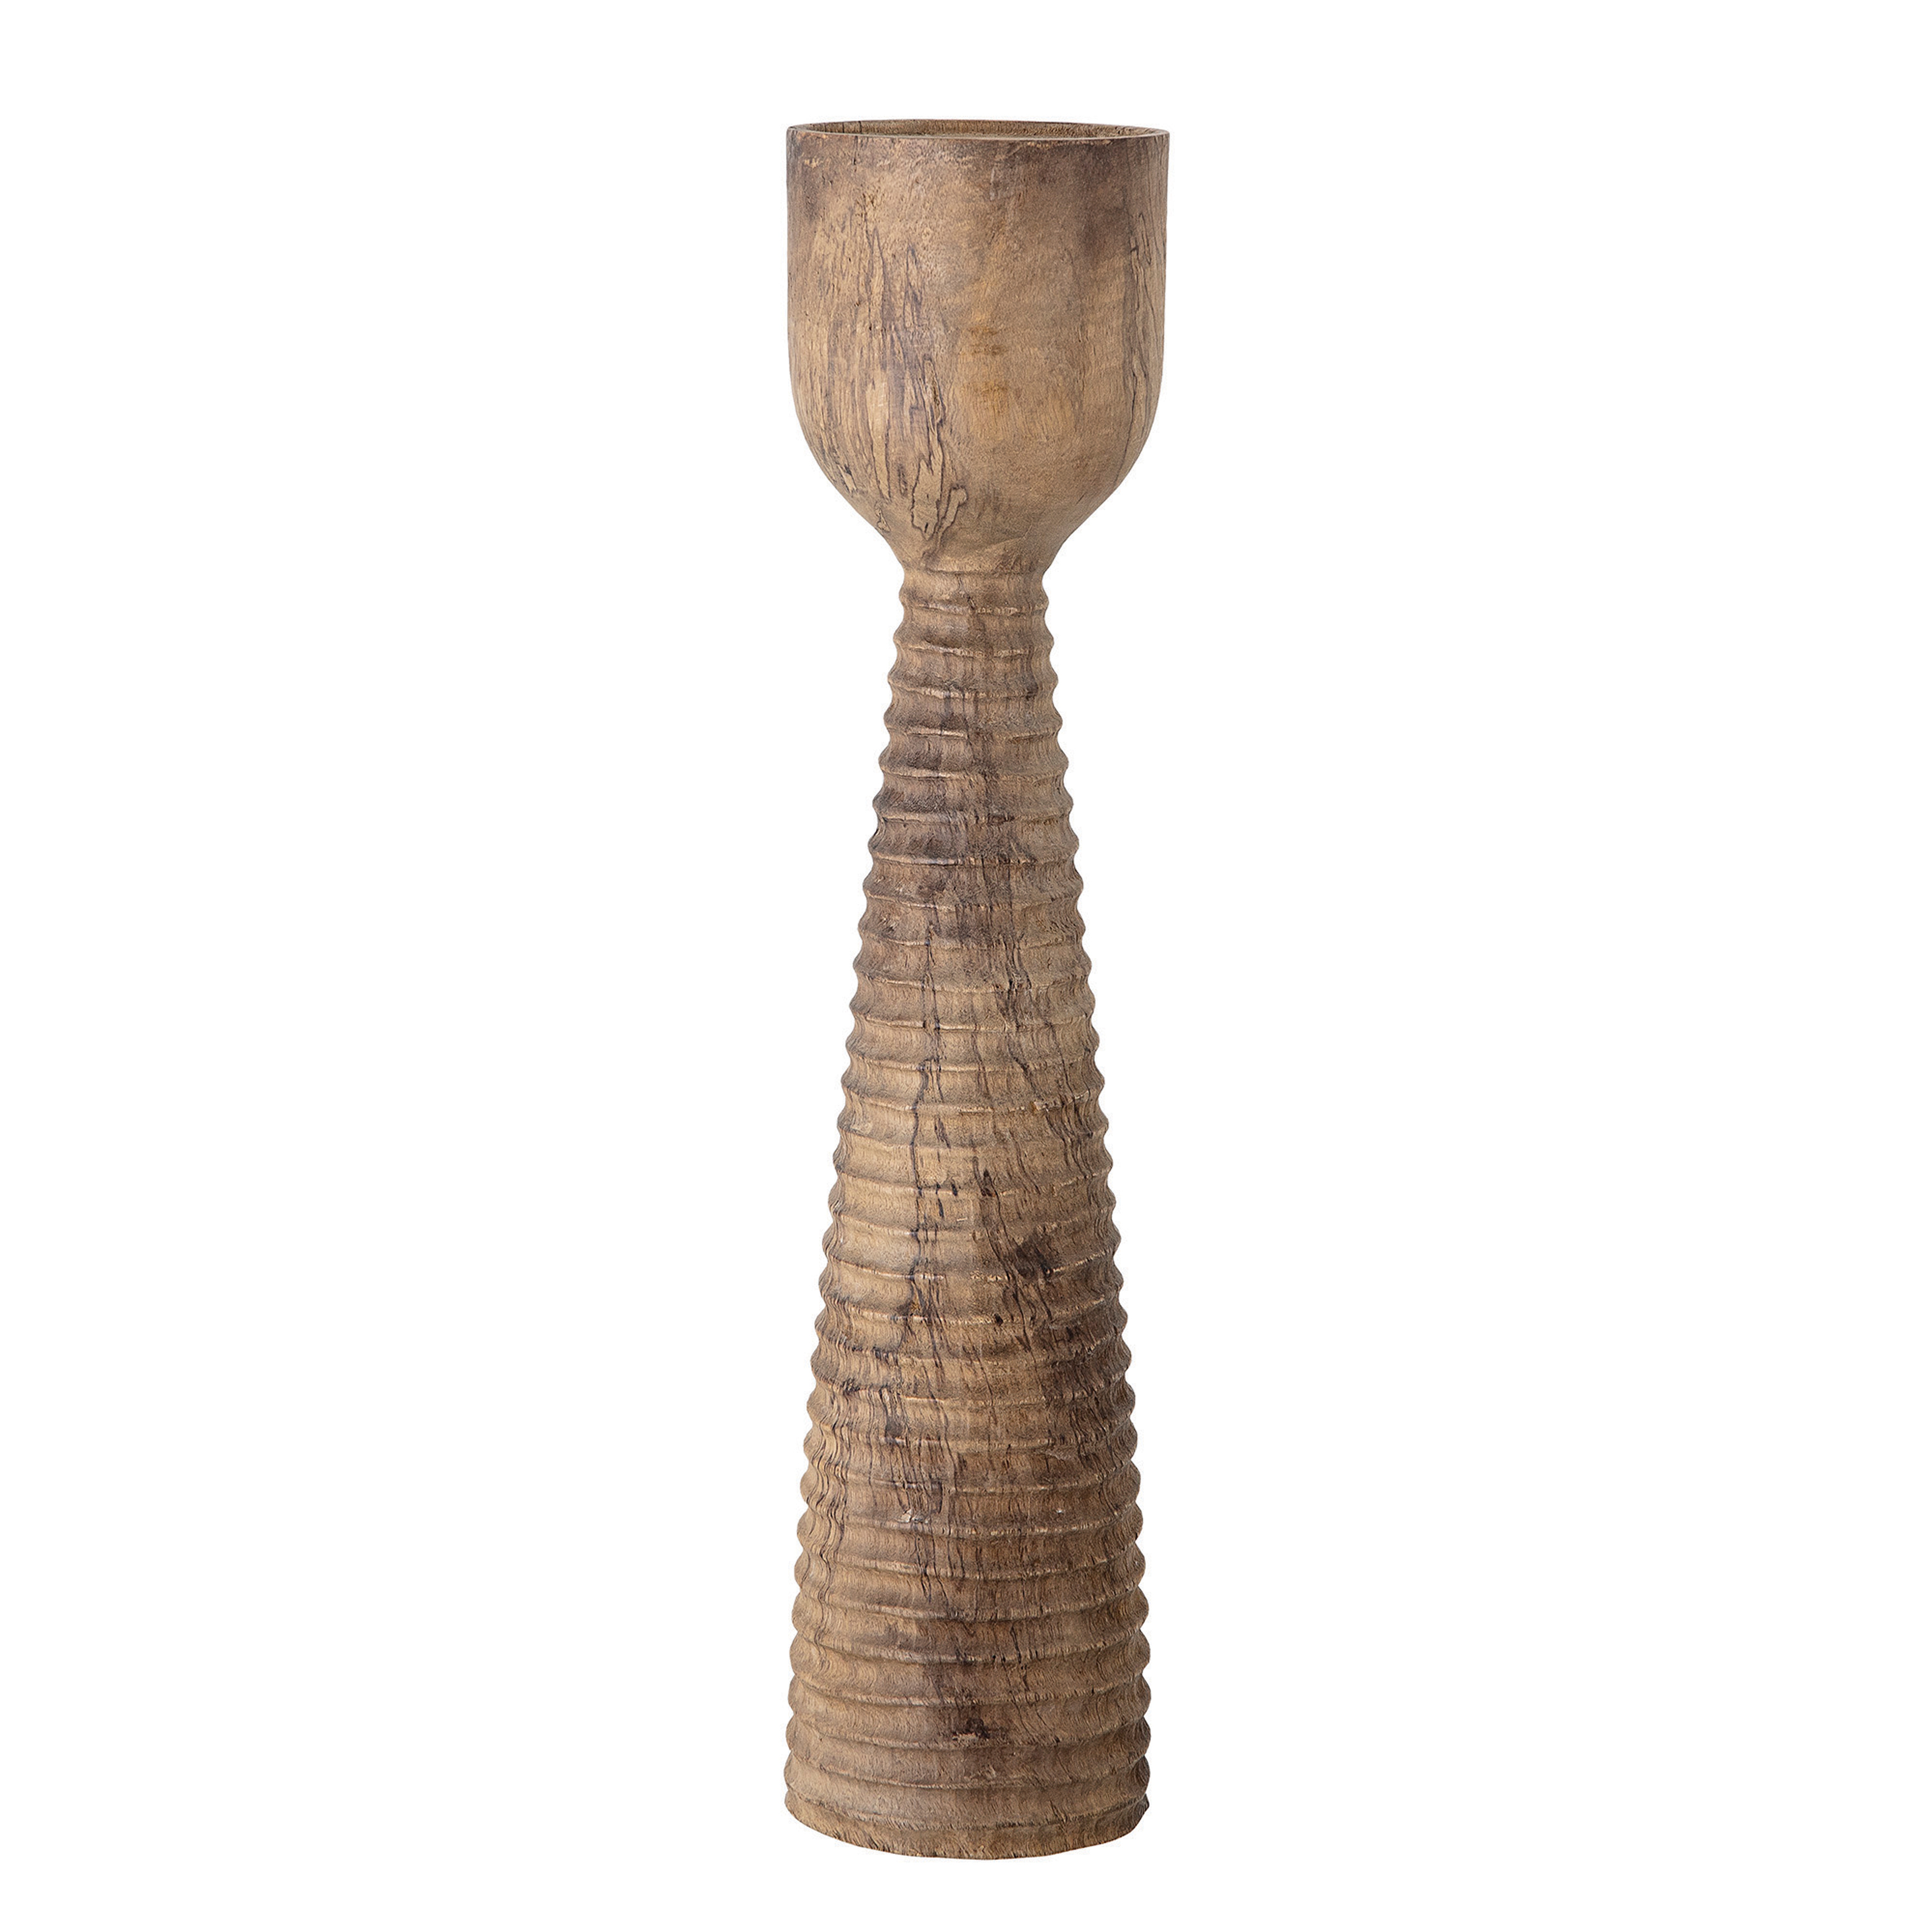 24"H Hand-Carved Mango Wood Candleholder with Ribbed Design (Holds 4" Pillar Candle) - Moss & Wilder